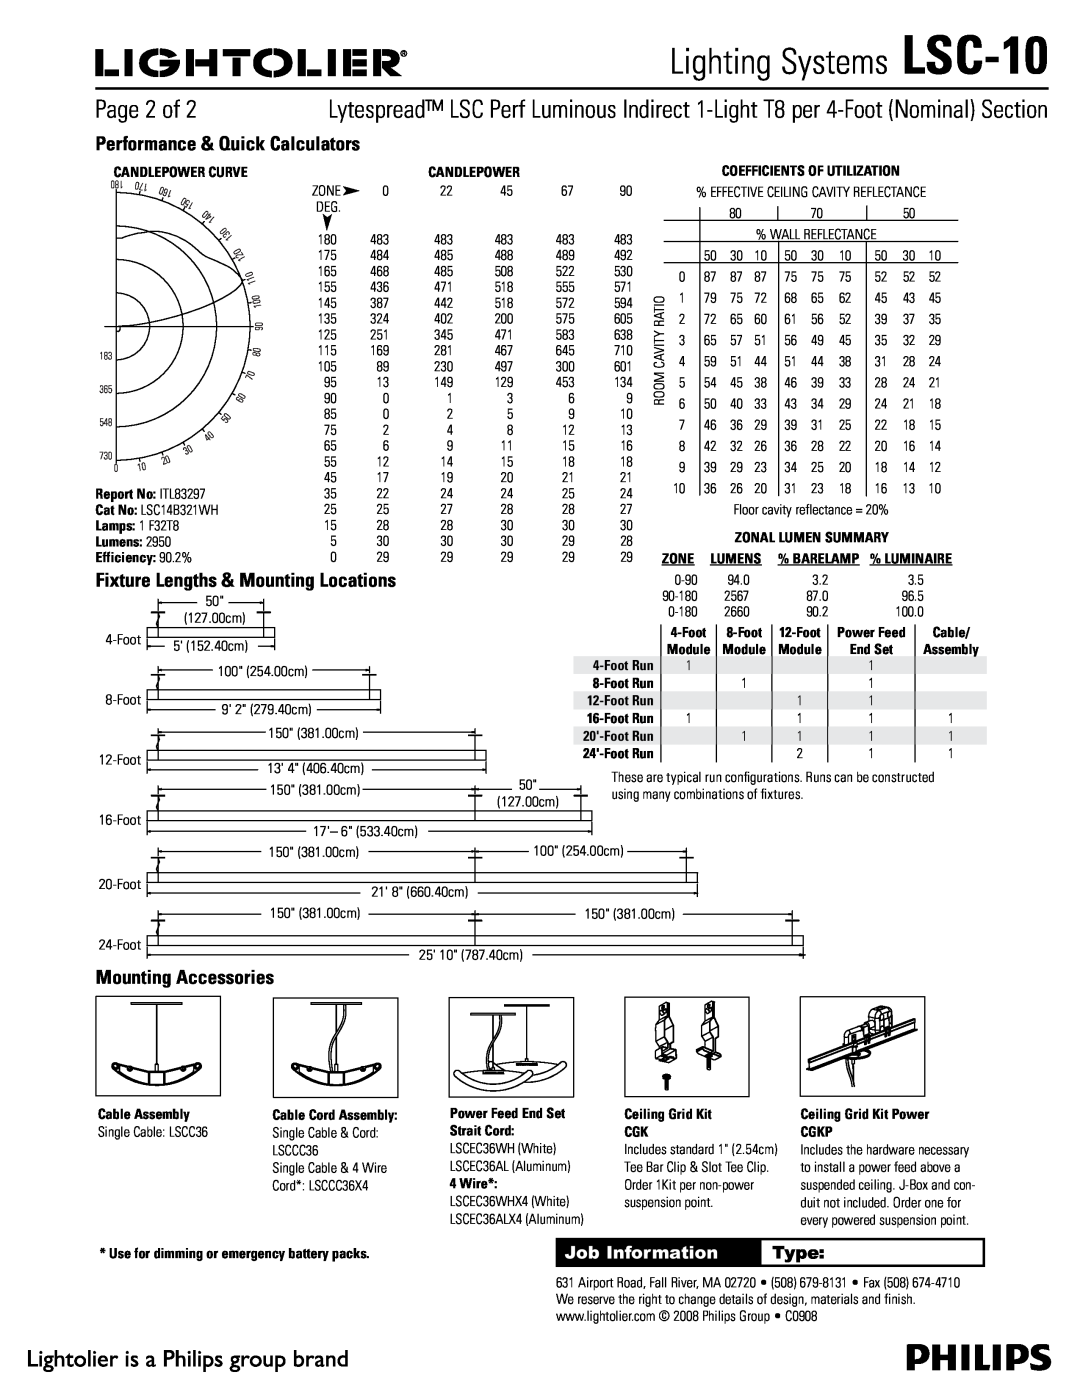 Lightolier manual 1BHFPG, Performance & Quick Calculators, Mounting Accessories, Type, Lighting Systems LSC-10 